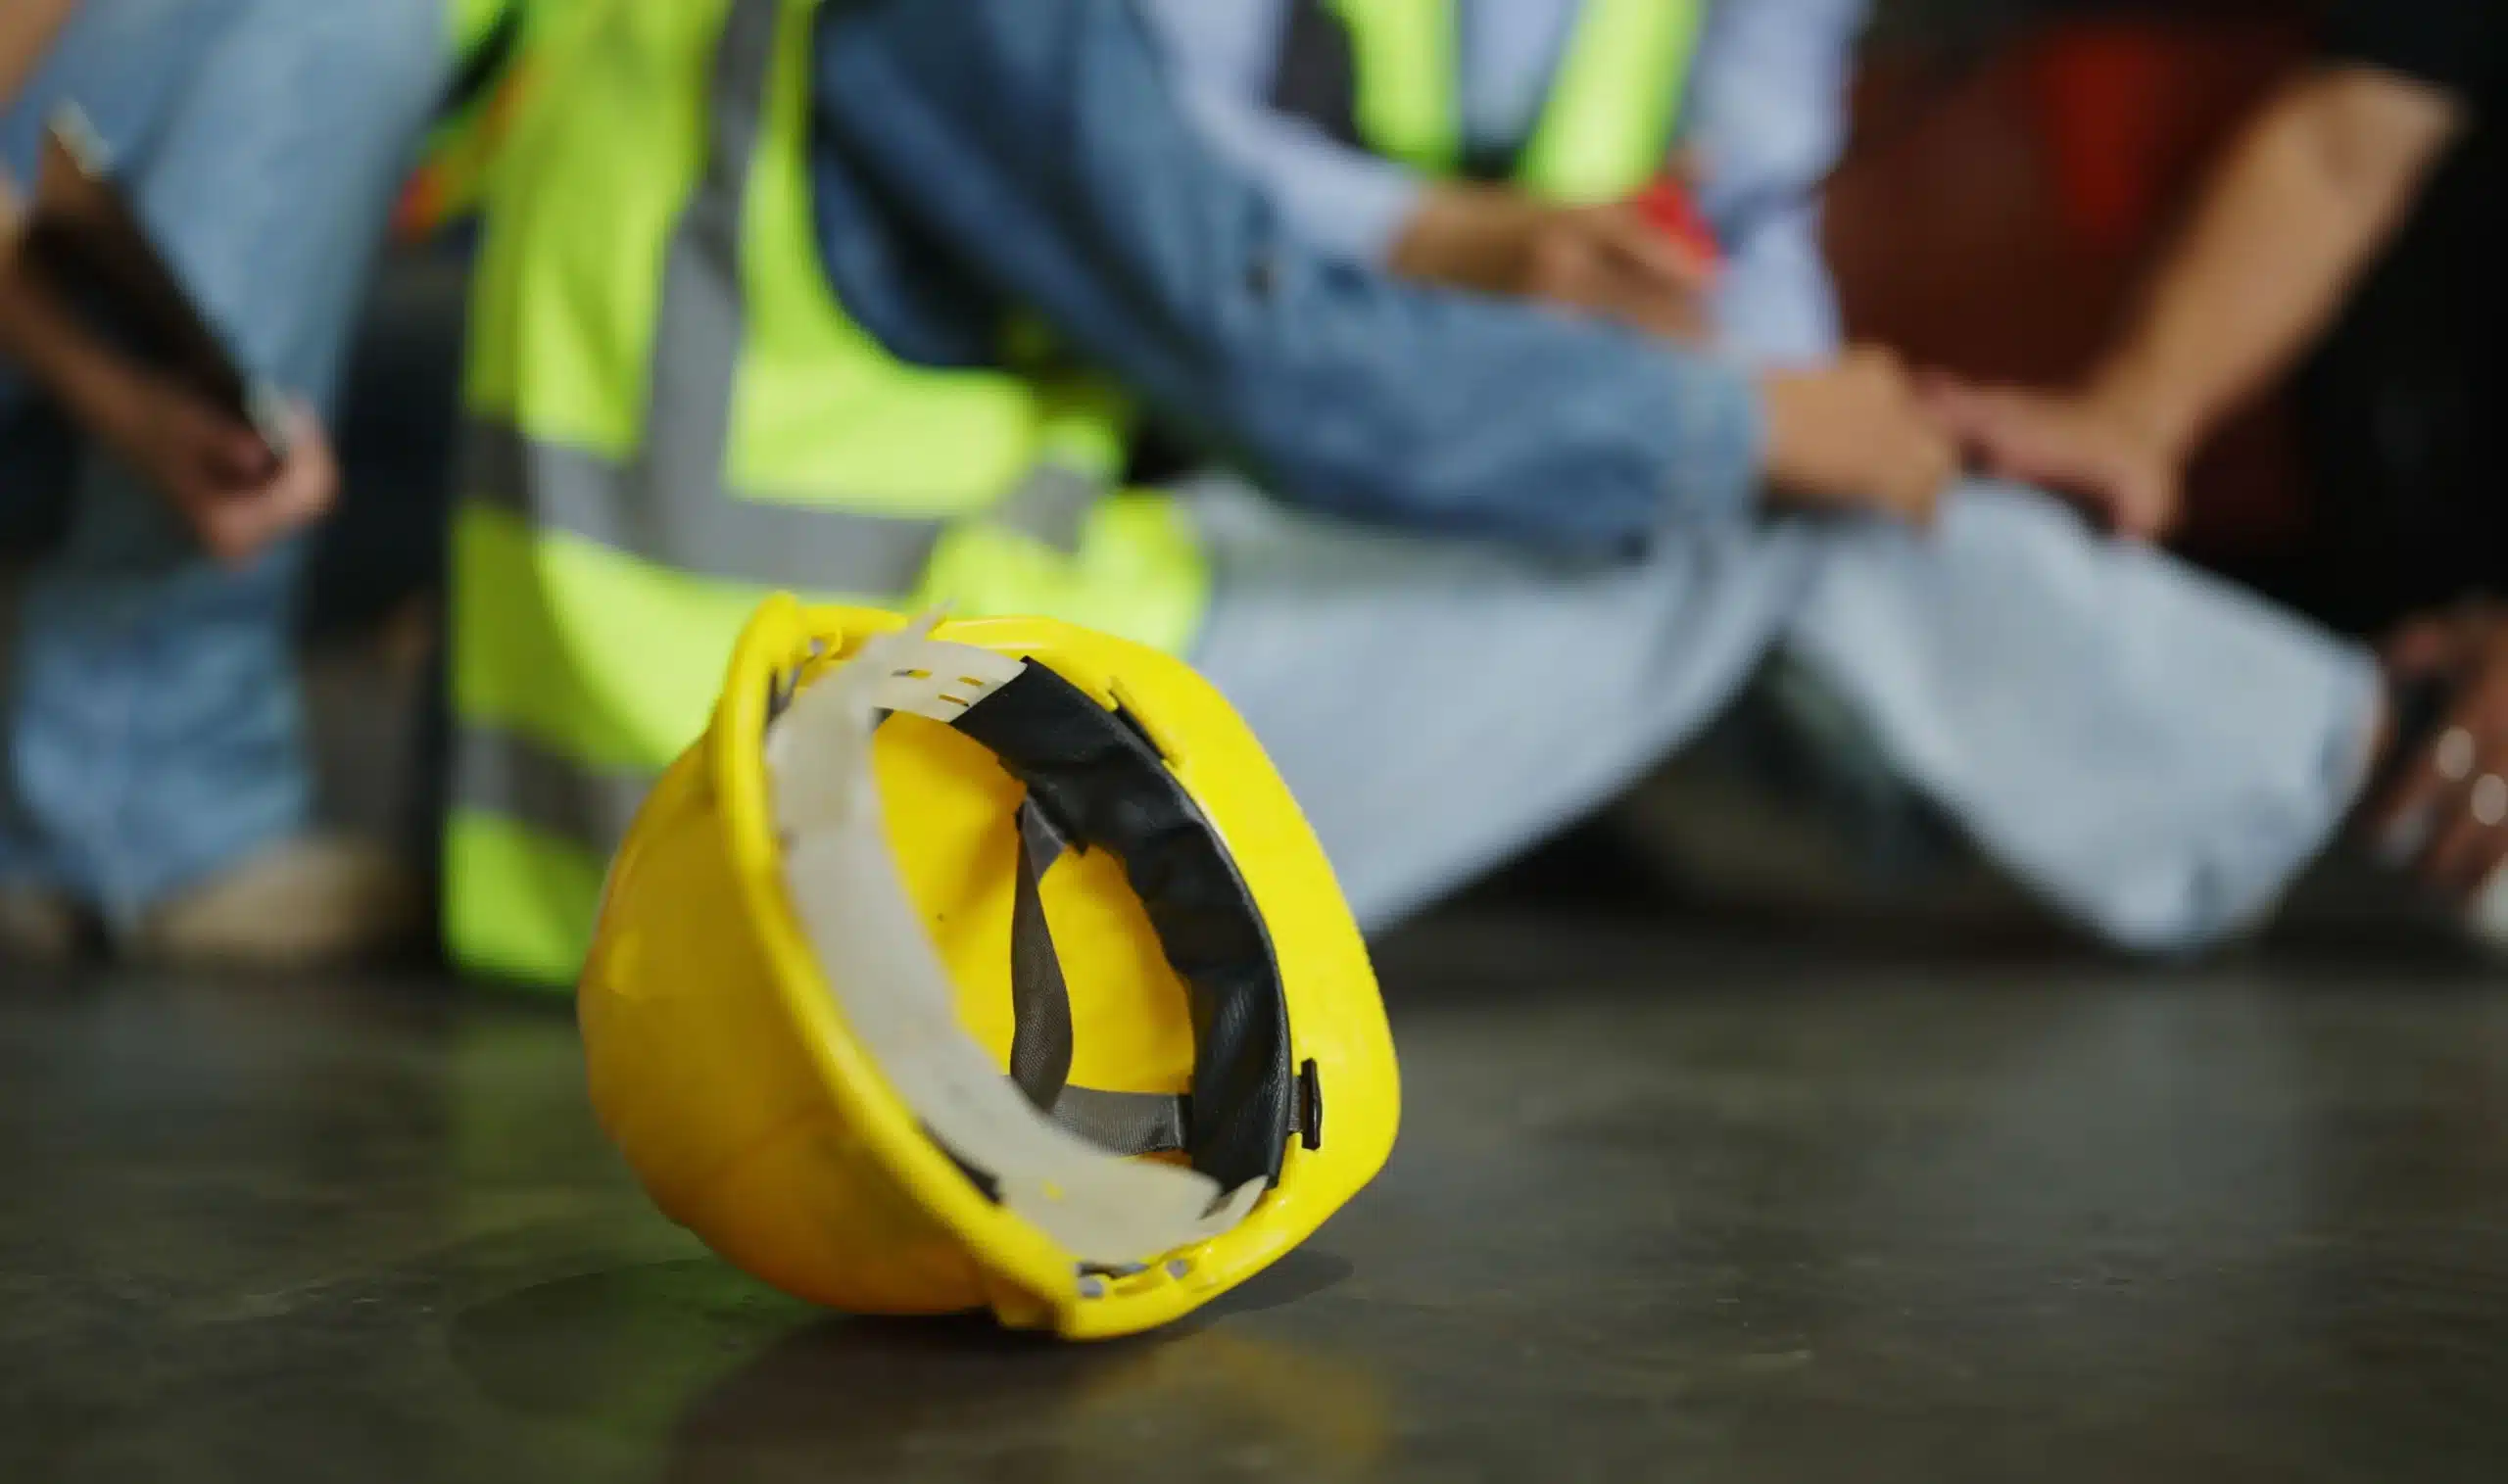 A construction helmet in the foreground with workers helping an injured colleague in the background.